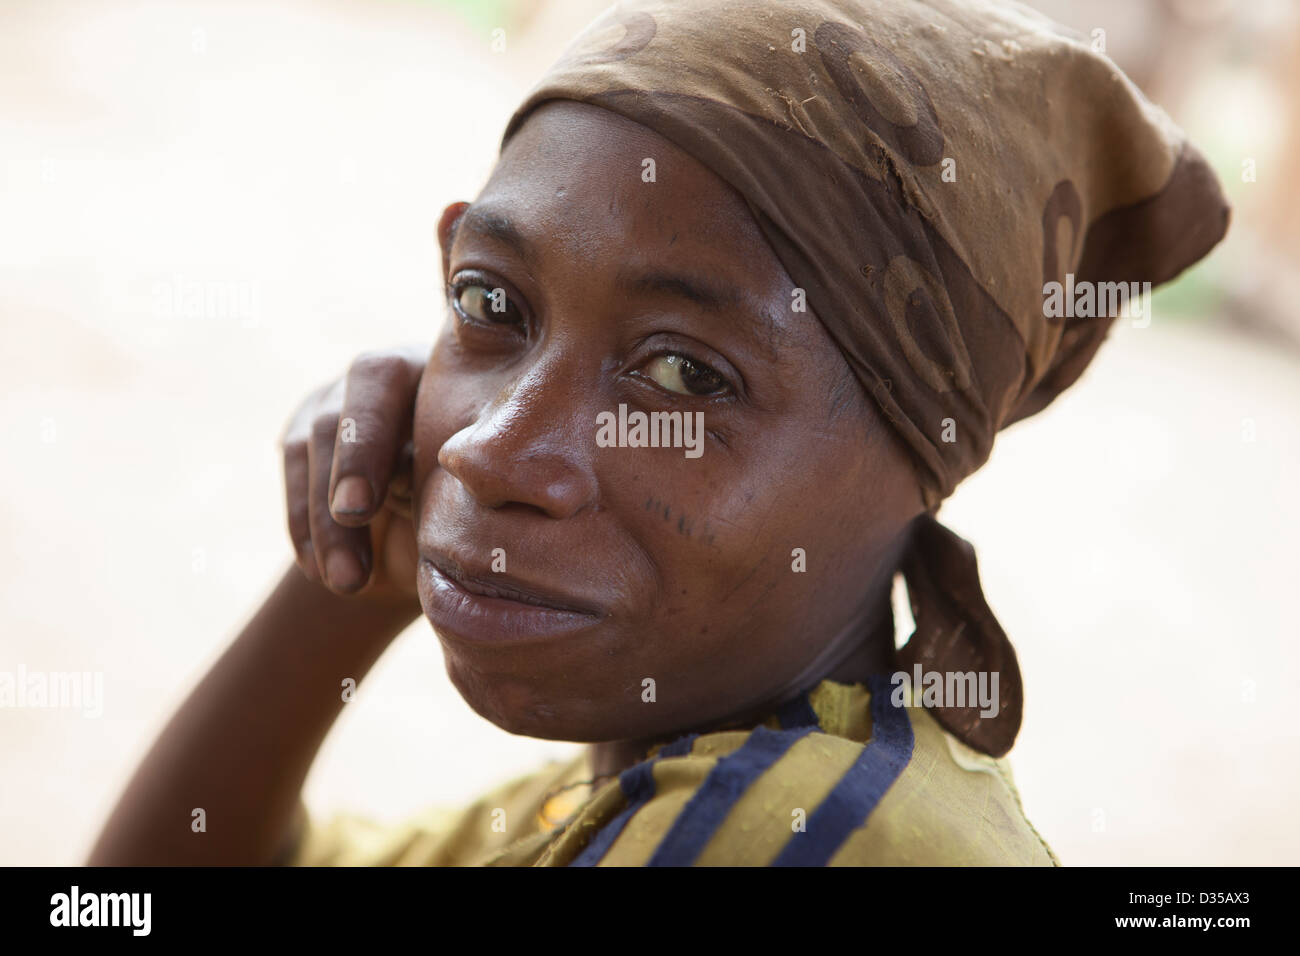 CONGO, 26th Sept 2012: A young woman in a community of Bata pigmy people, Sieh village. Stock Photo